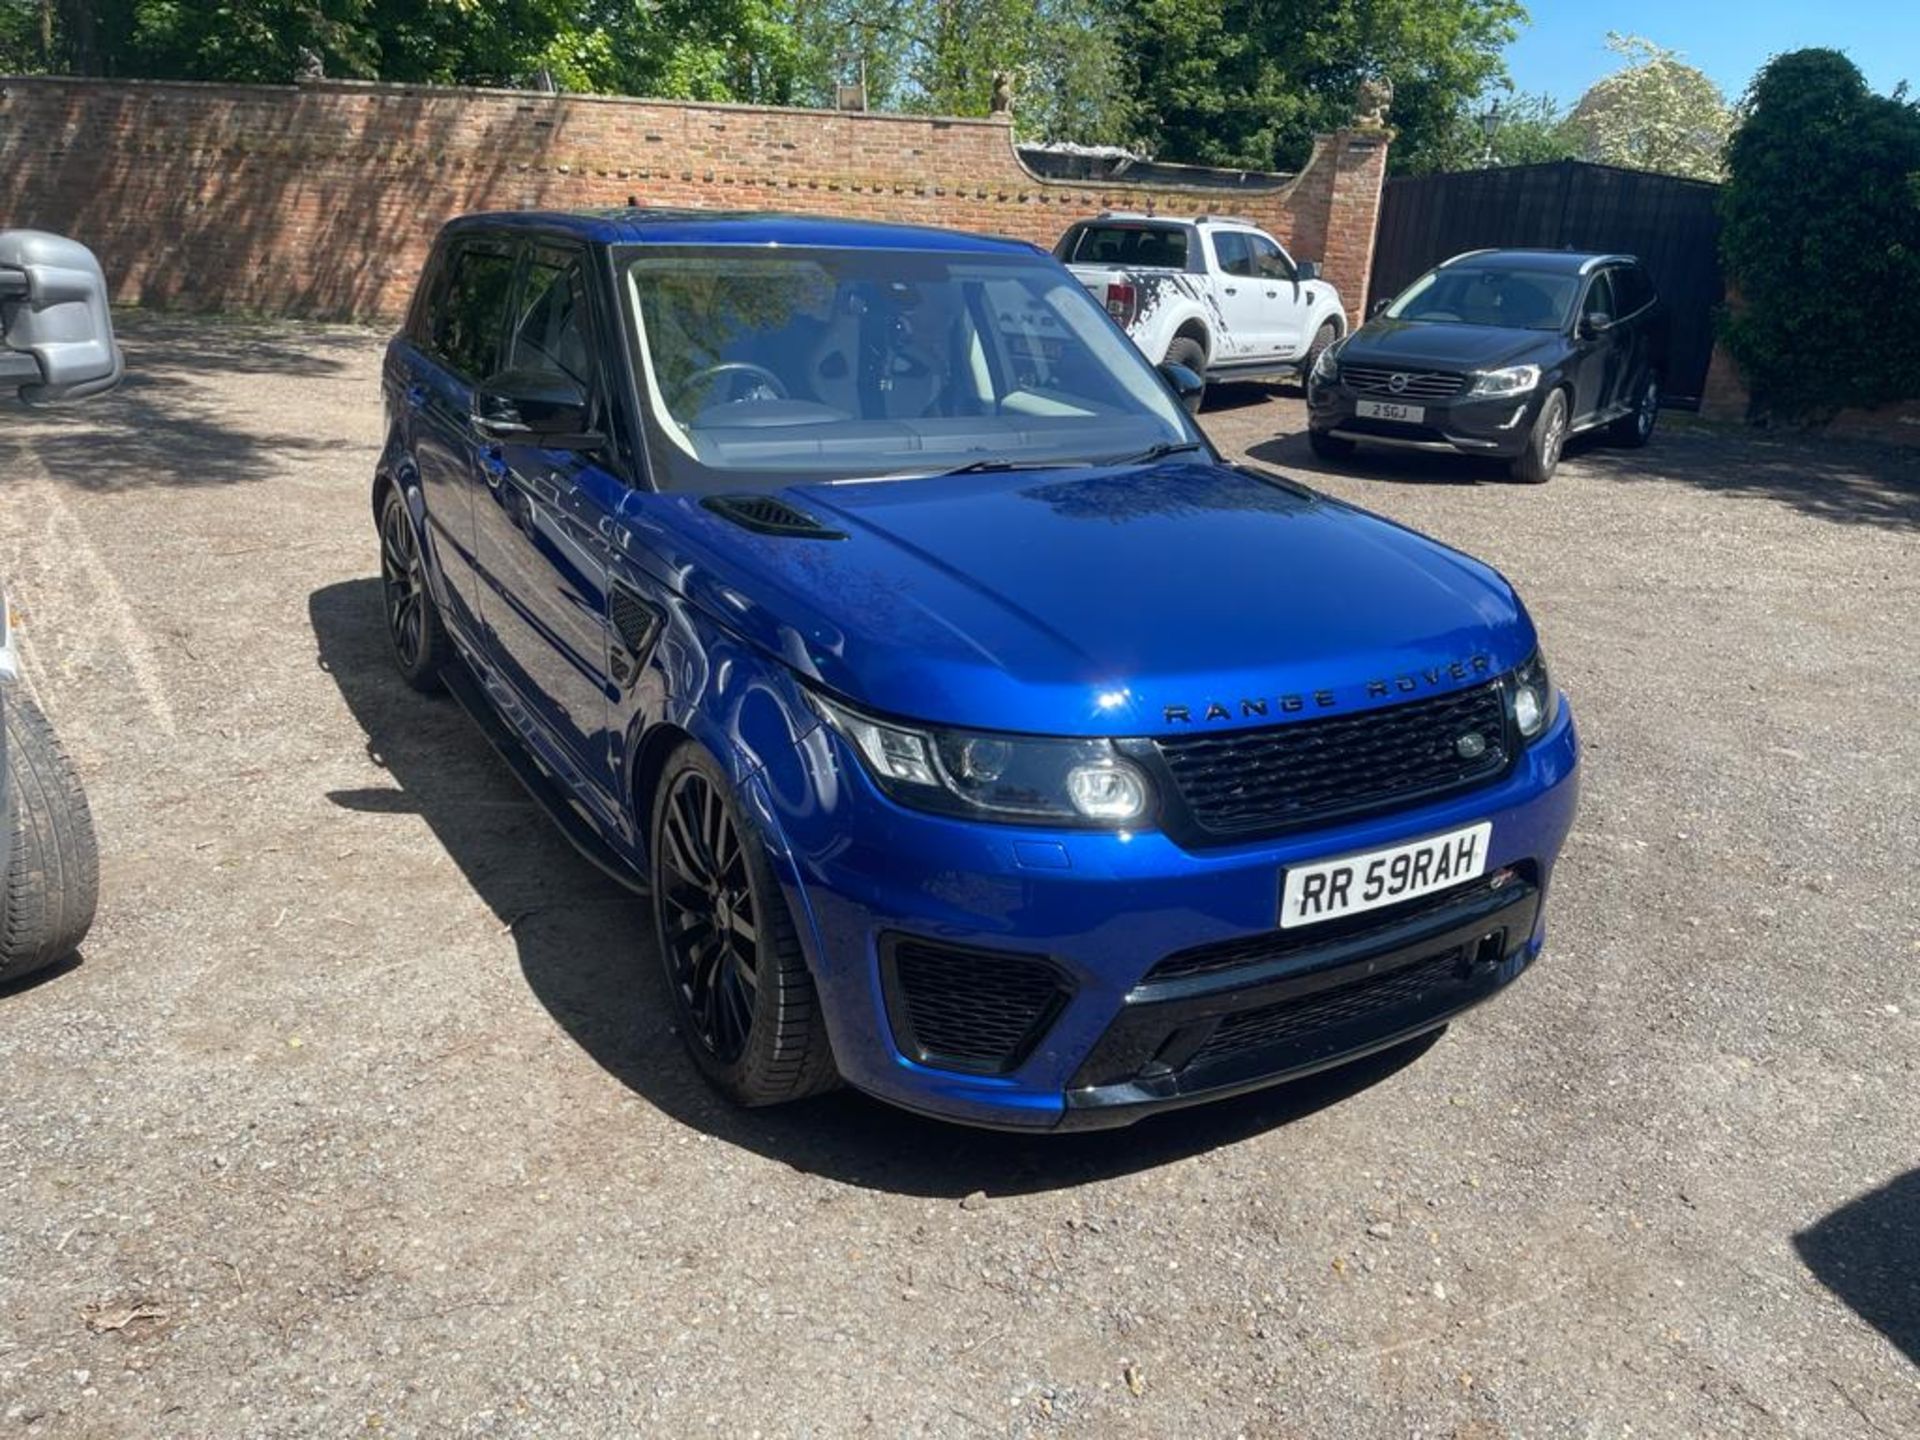 2016 RANGE ROVER SPORT SVR AUTOBIOGRAPHY DYNAMIC V8 SUPERCHARGED AUTOMATIC 5.0 550PS PETROL ENGINE - Image 7 of 28